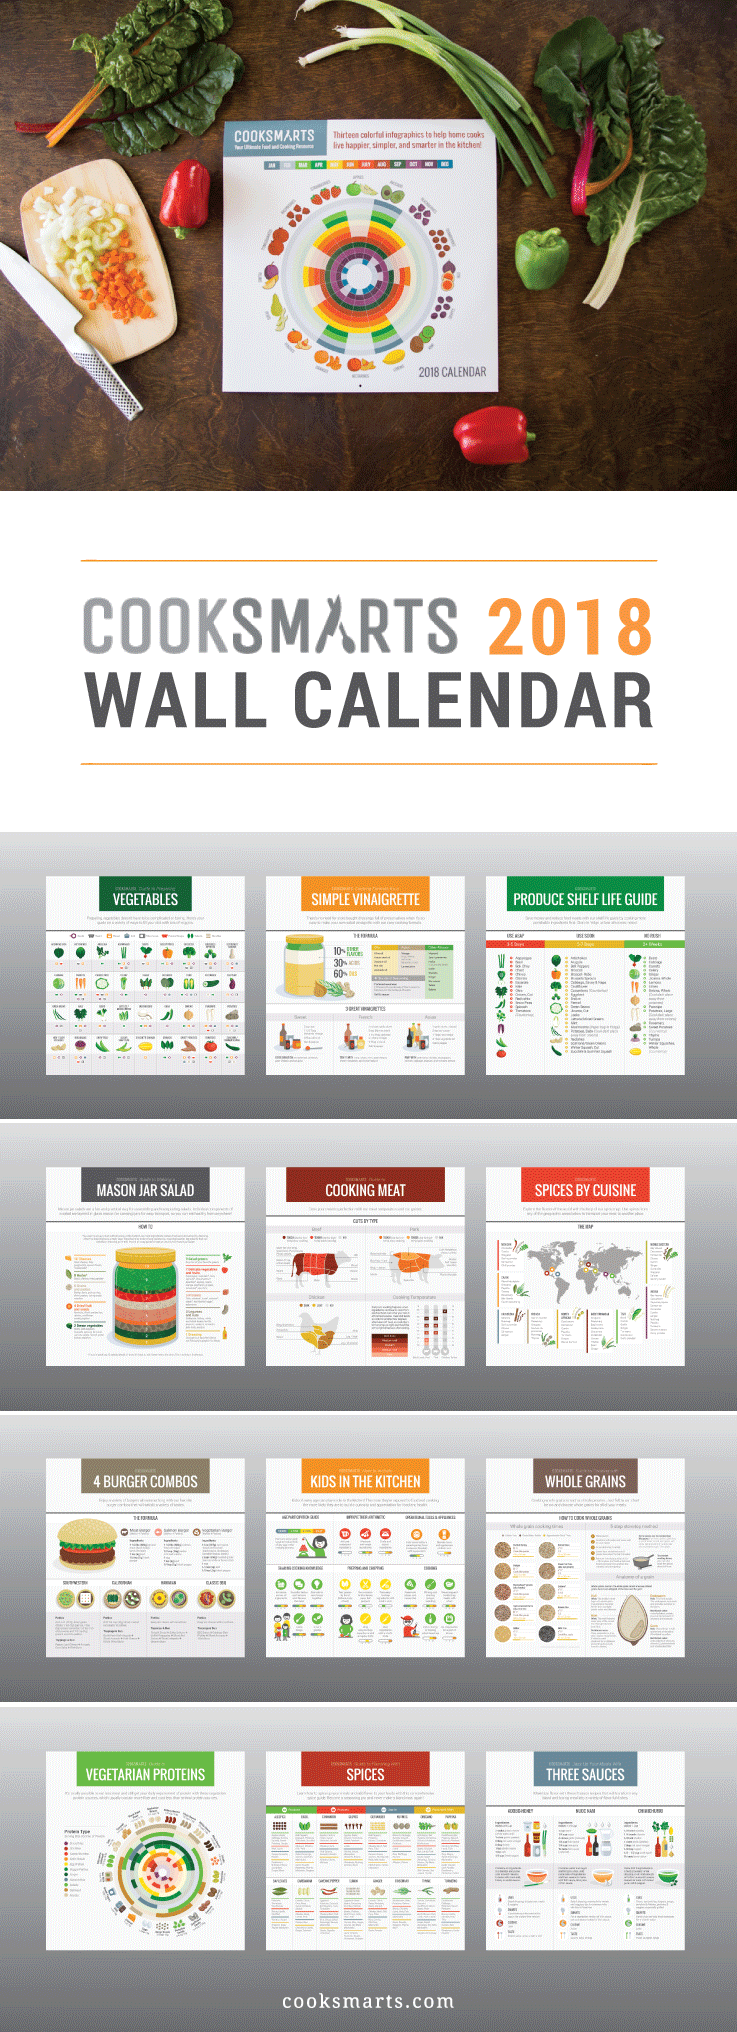 Cook Smarts 2018 Infographic Wall Calendar